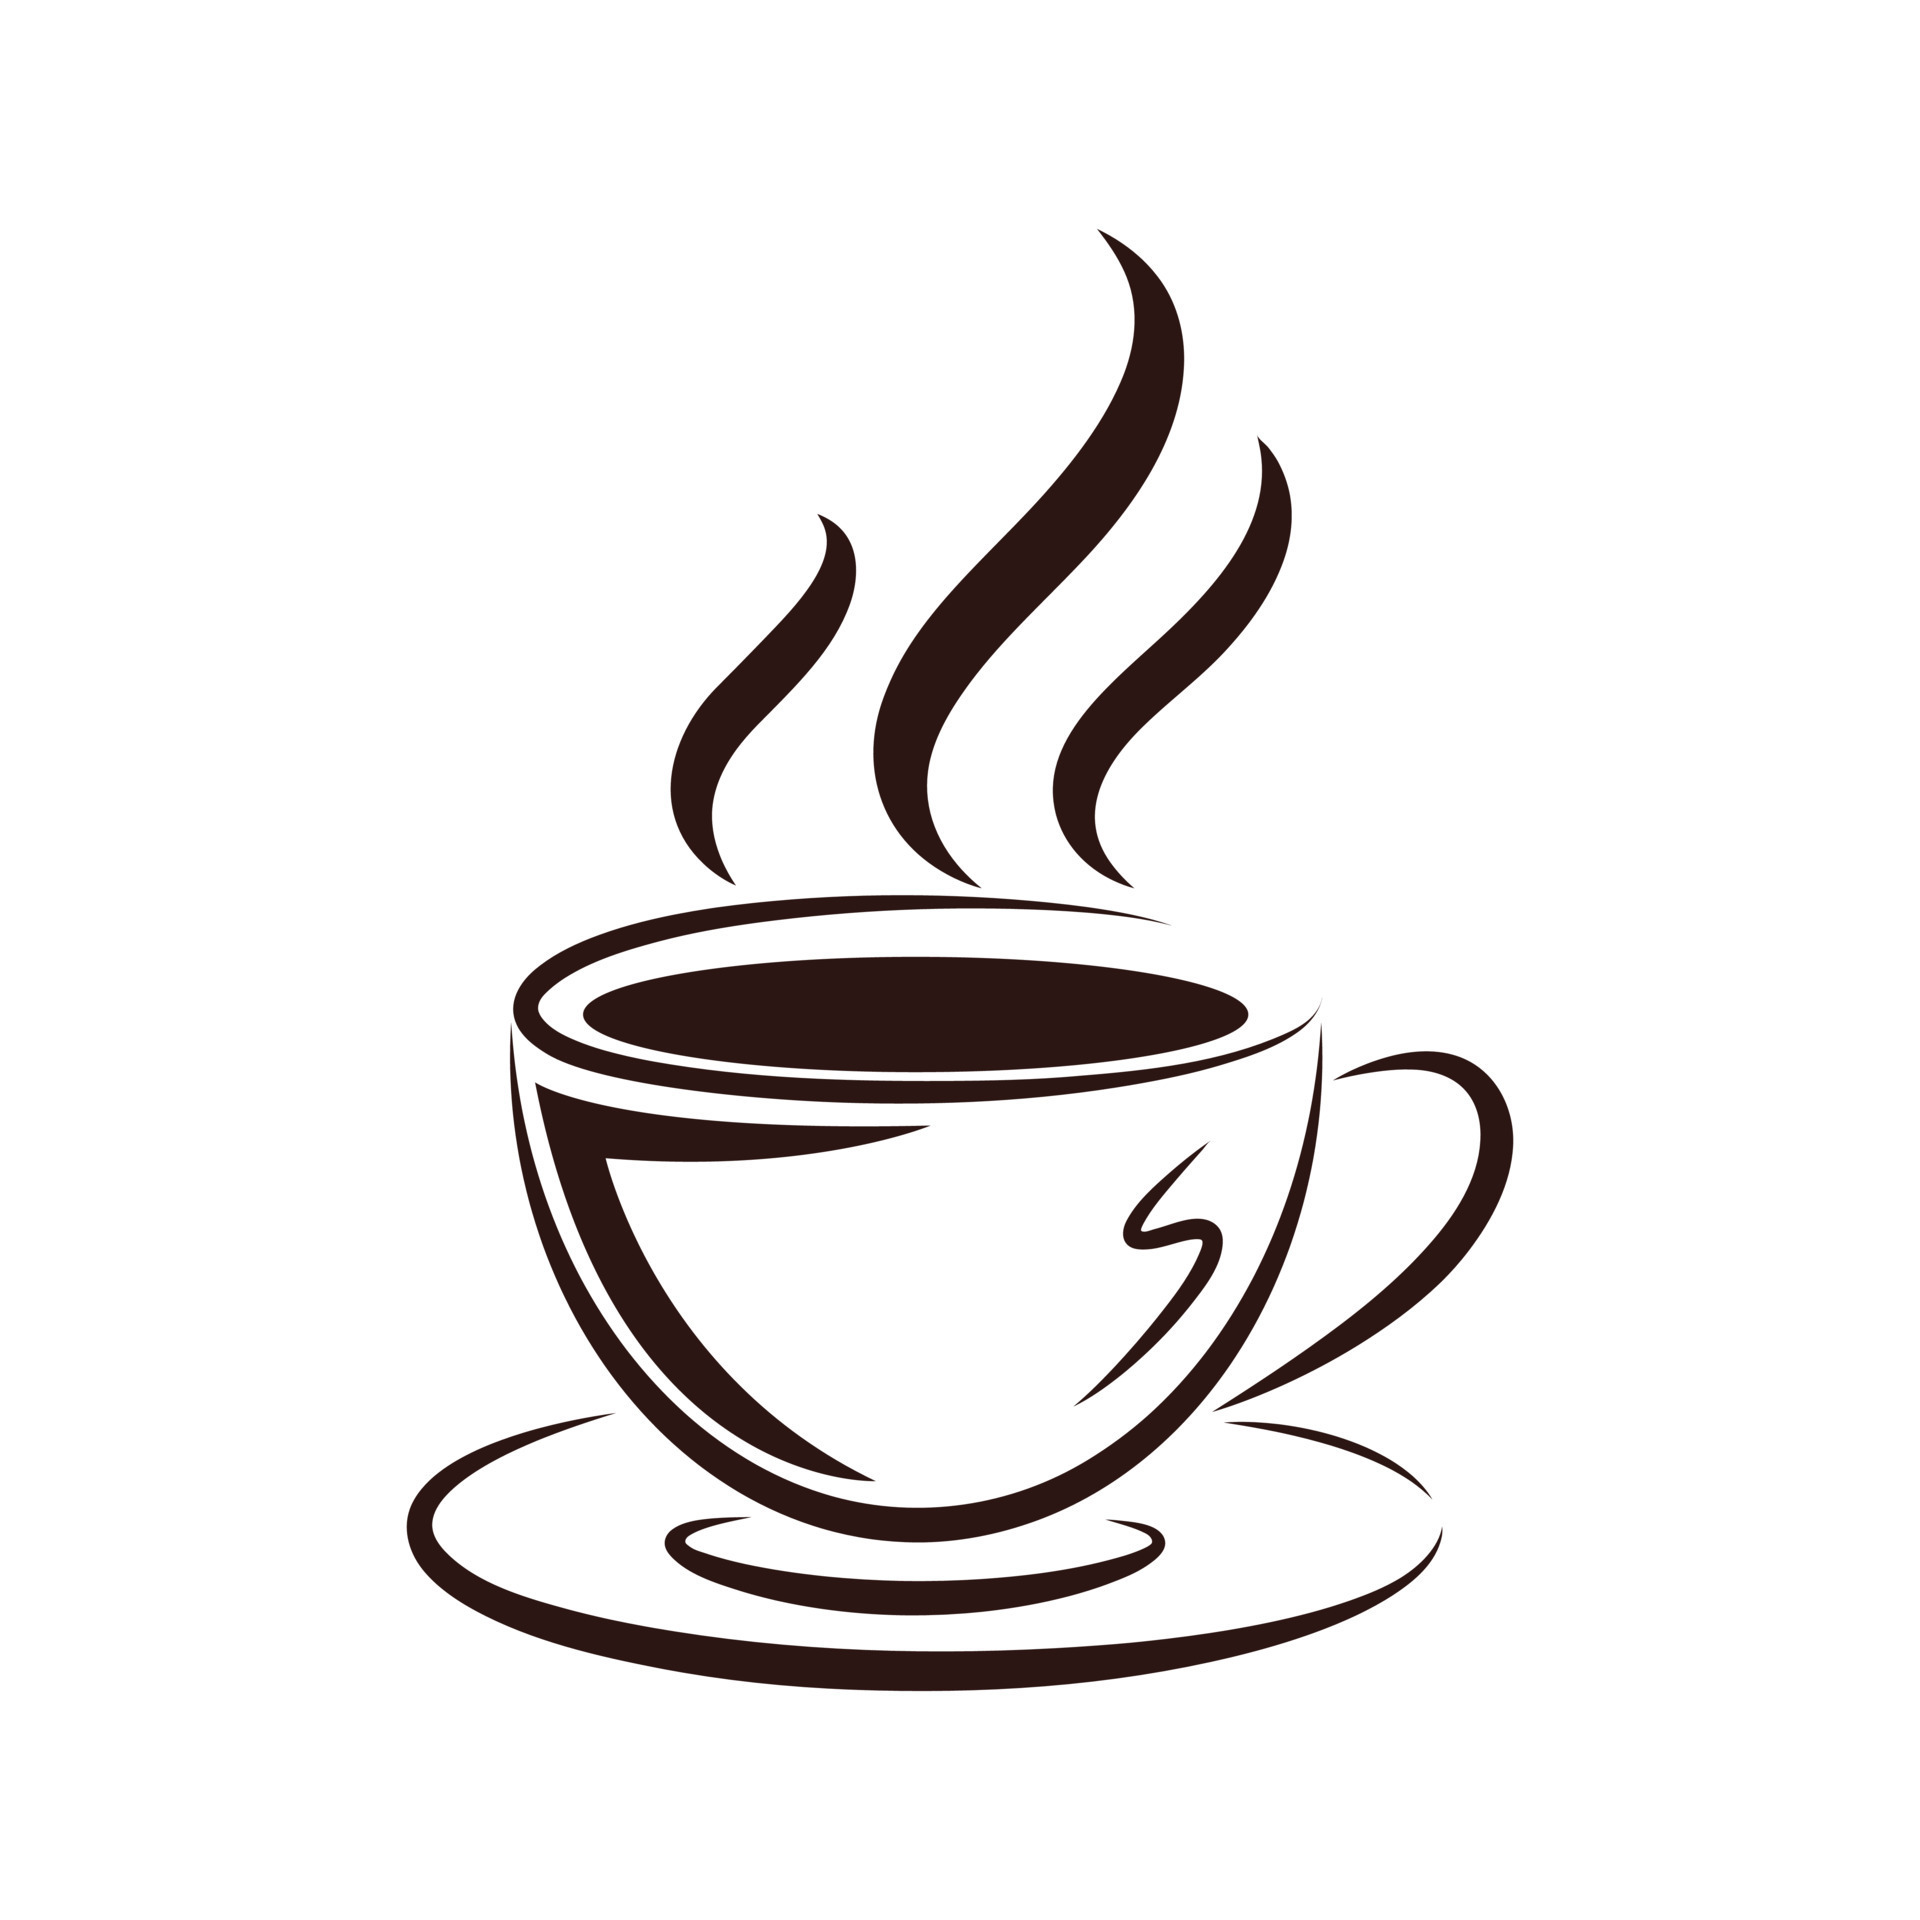 https://static.vecteezy.com/system/resources/previews/005/871/328/original/coffee-cup-icon-free-vector.jpg